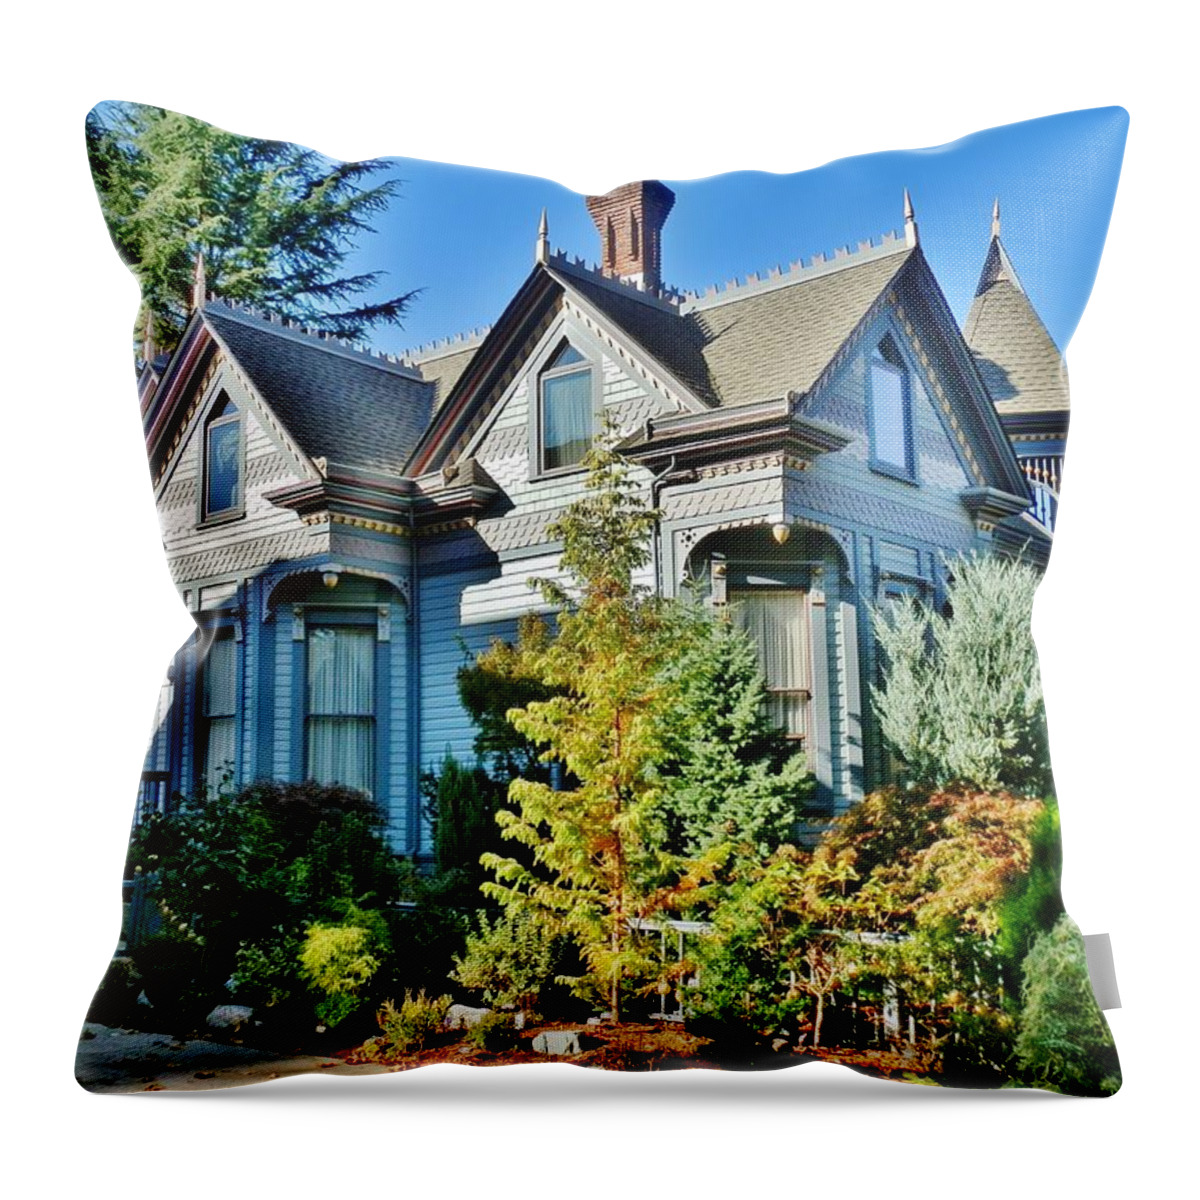 House Throw Pillow featuring the photograph C'est La Vie by VLee Watson